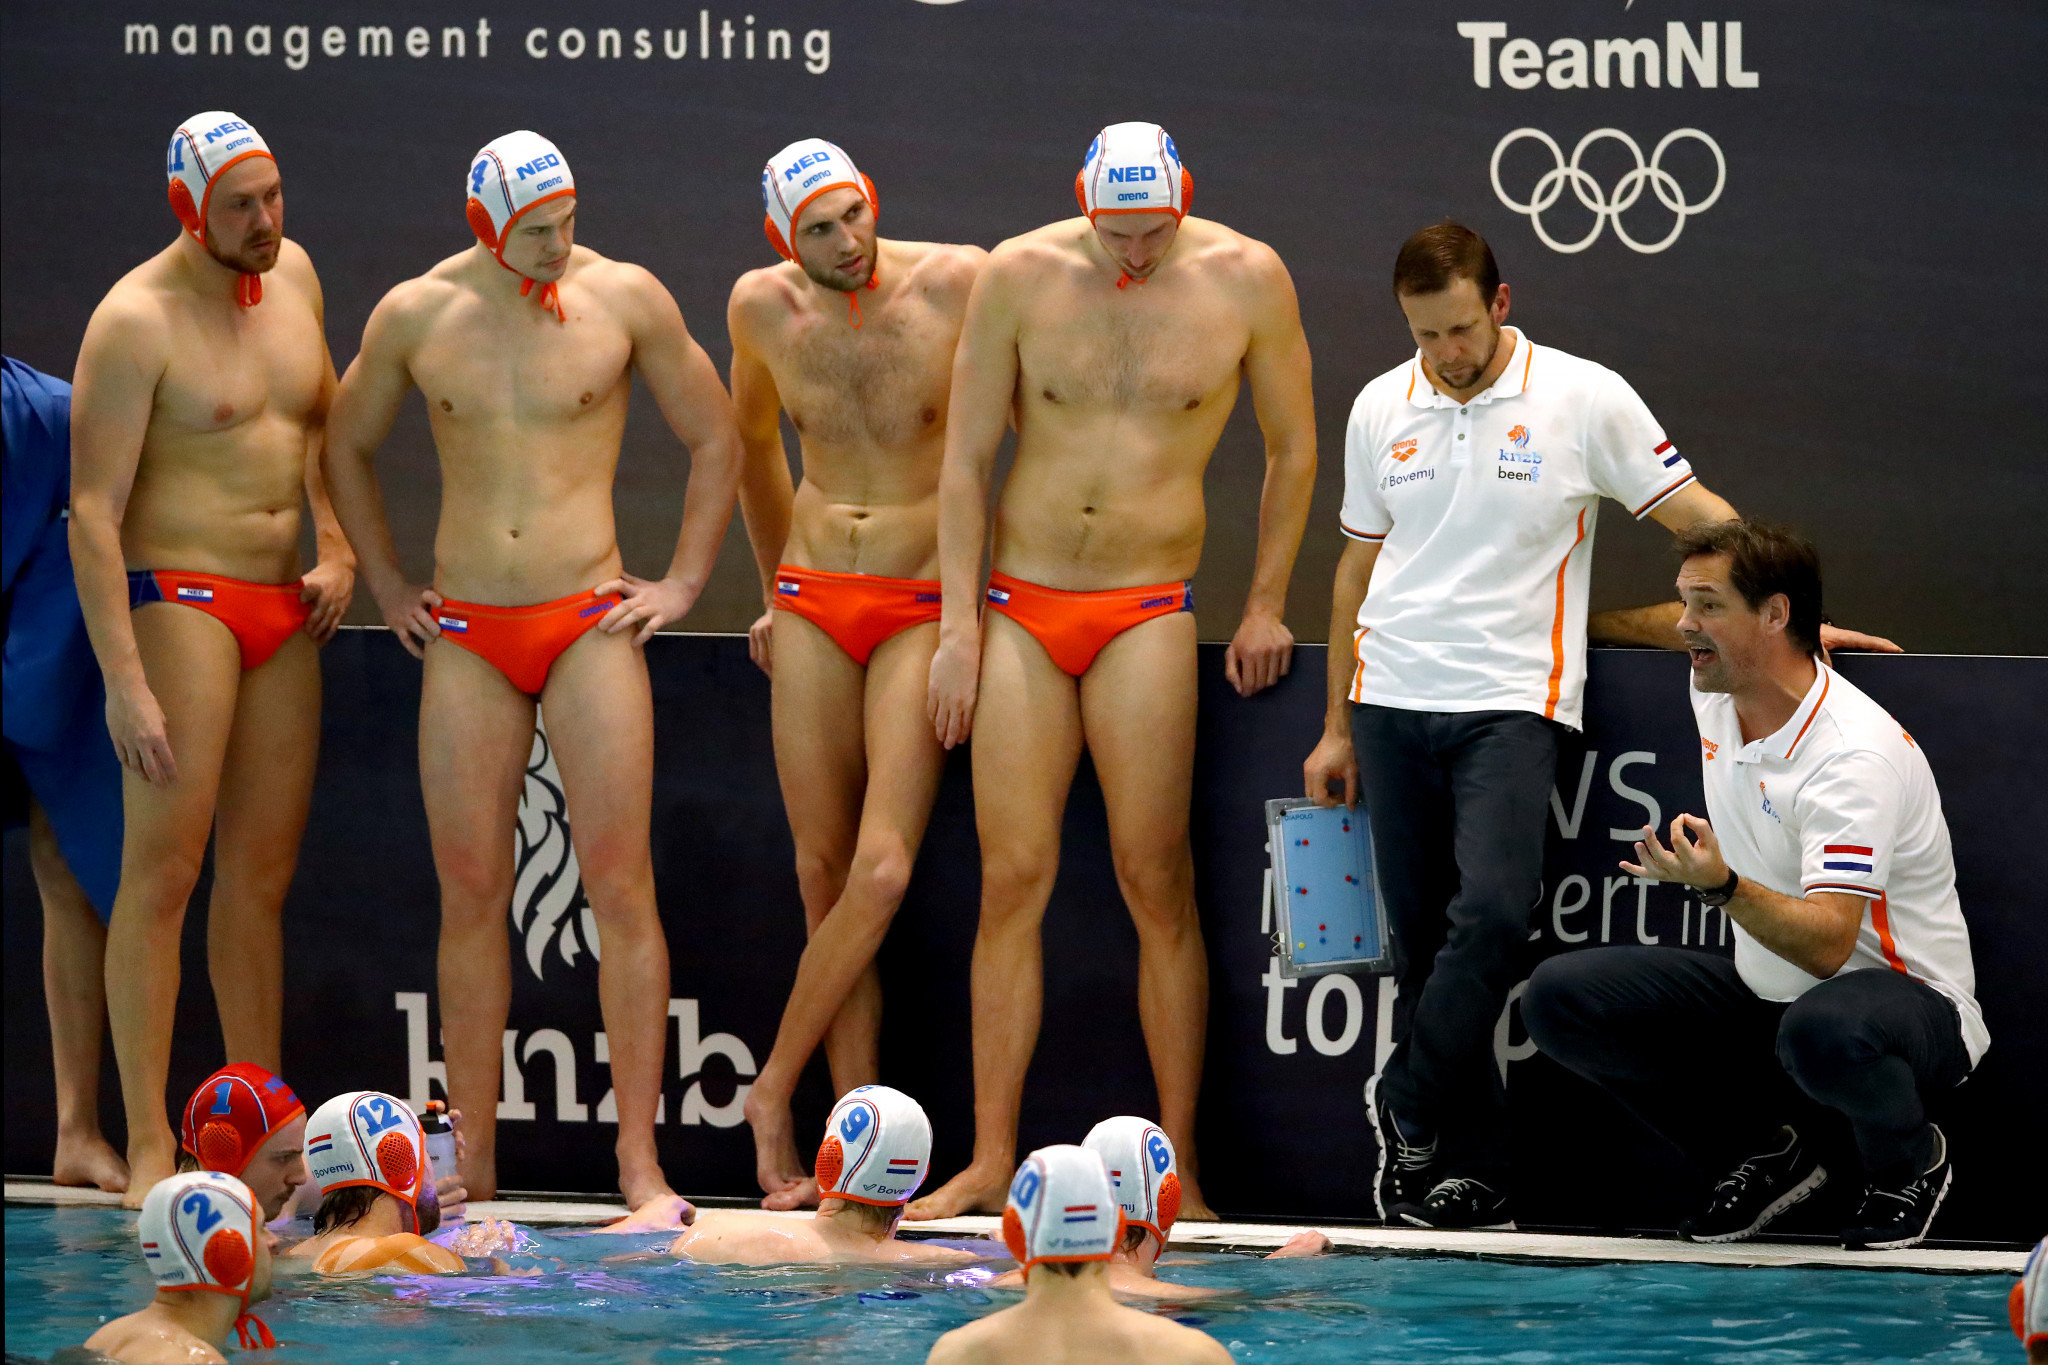 Hosts The Netherlands were defeated in the quarter-finals of the men's Olympic water polo qualification tournament ©Getty Images